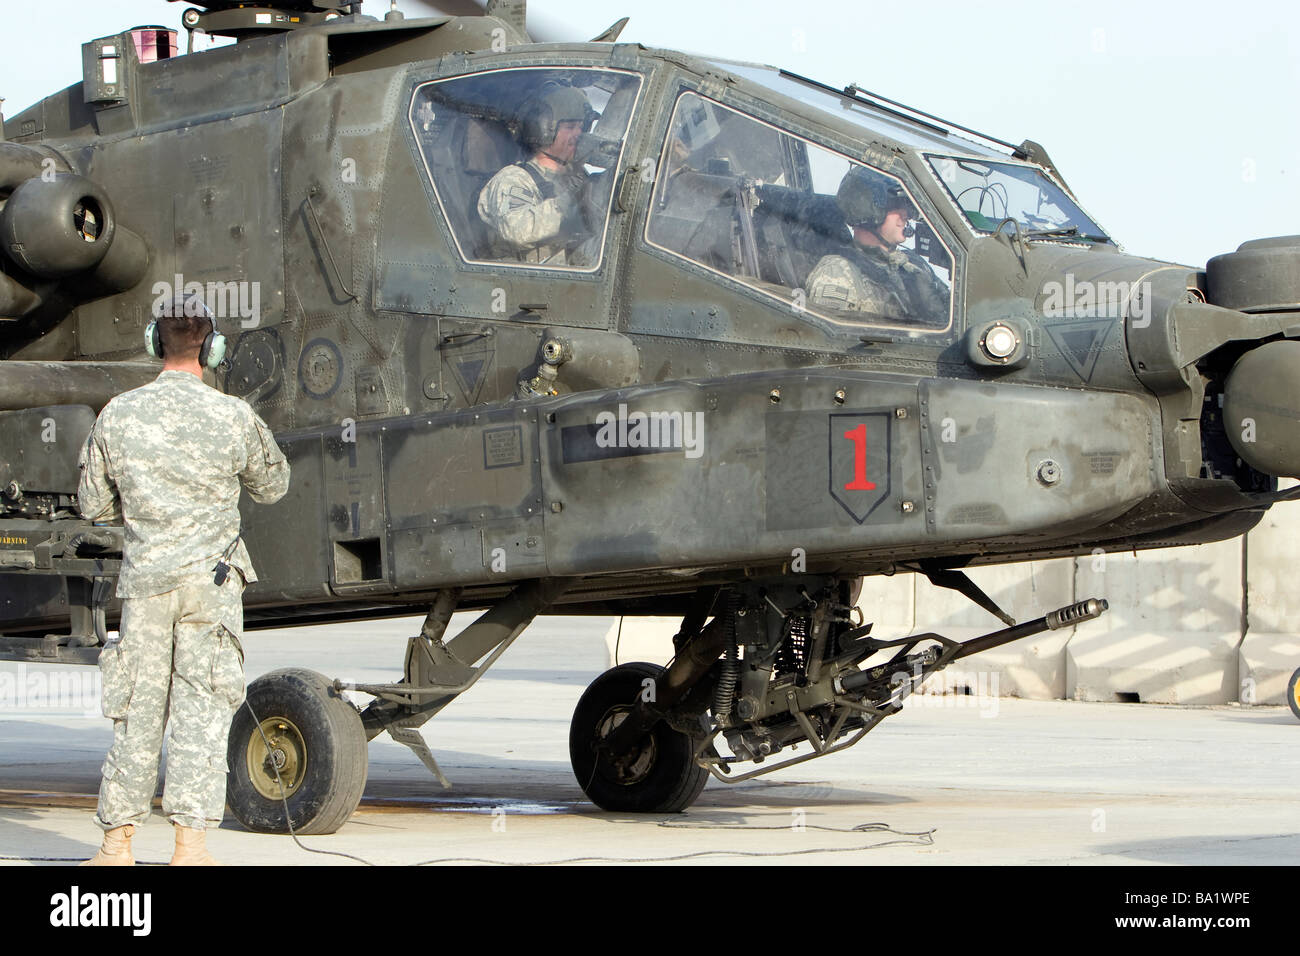 tikrit-iraq-ah-64-apache-preparing-to-leave-its-pad-for-a-mission-BA1WPE.jpg